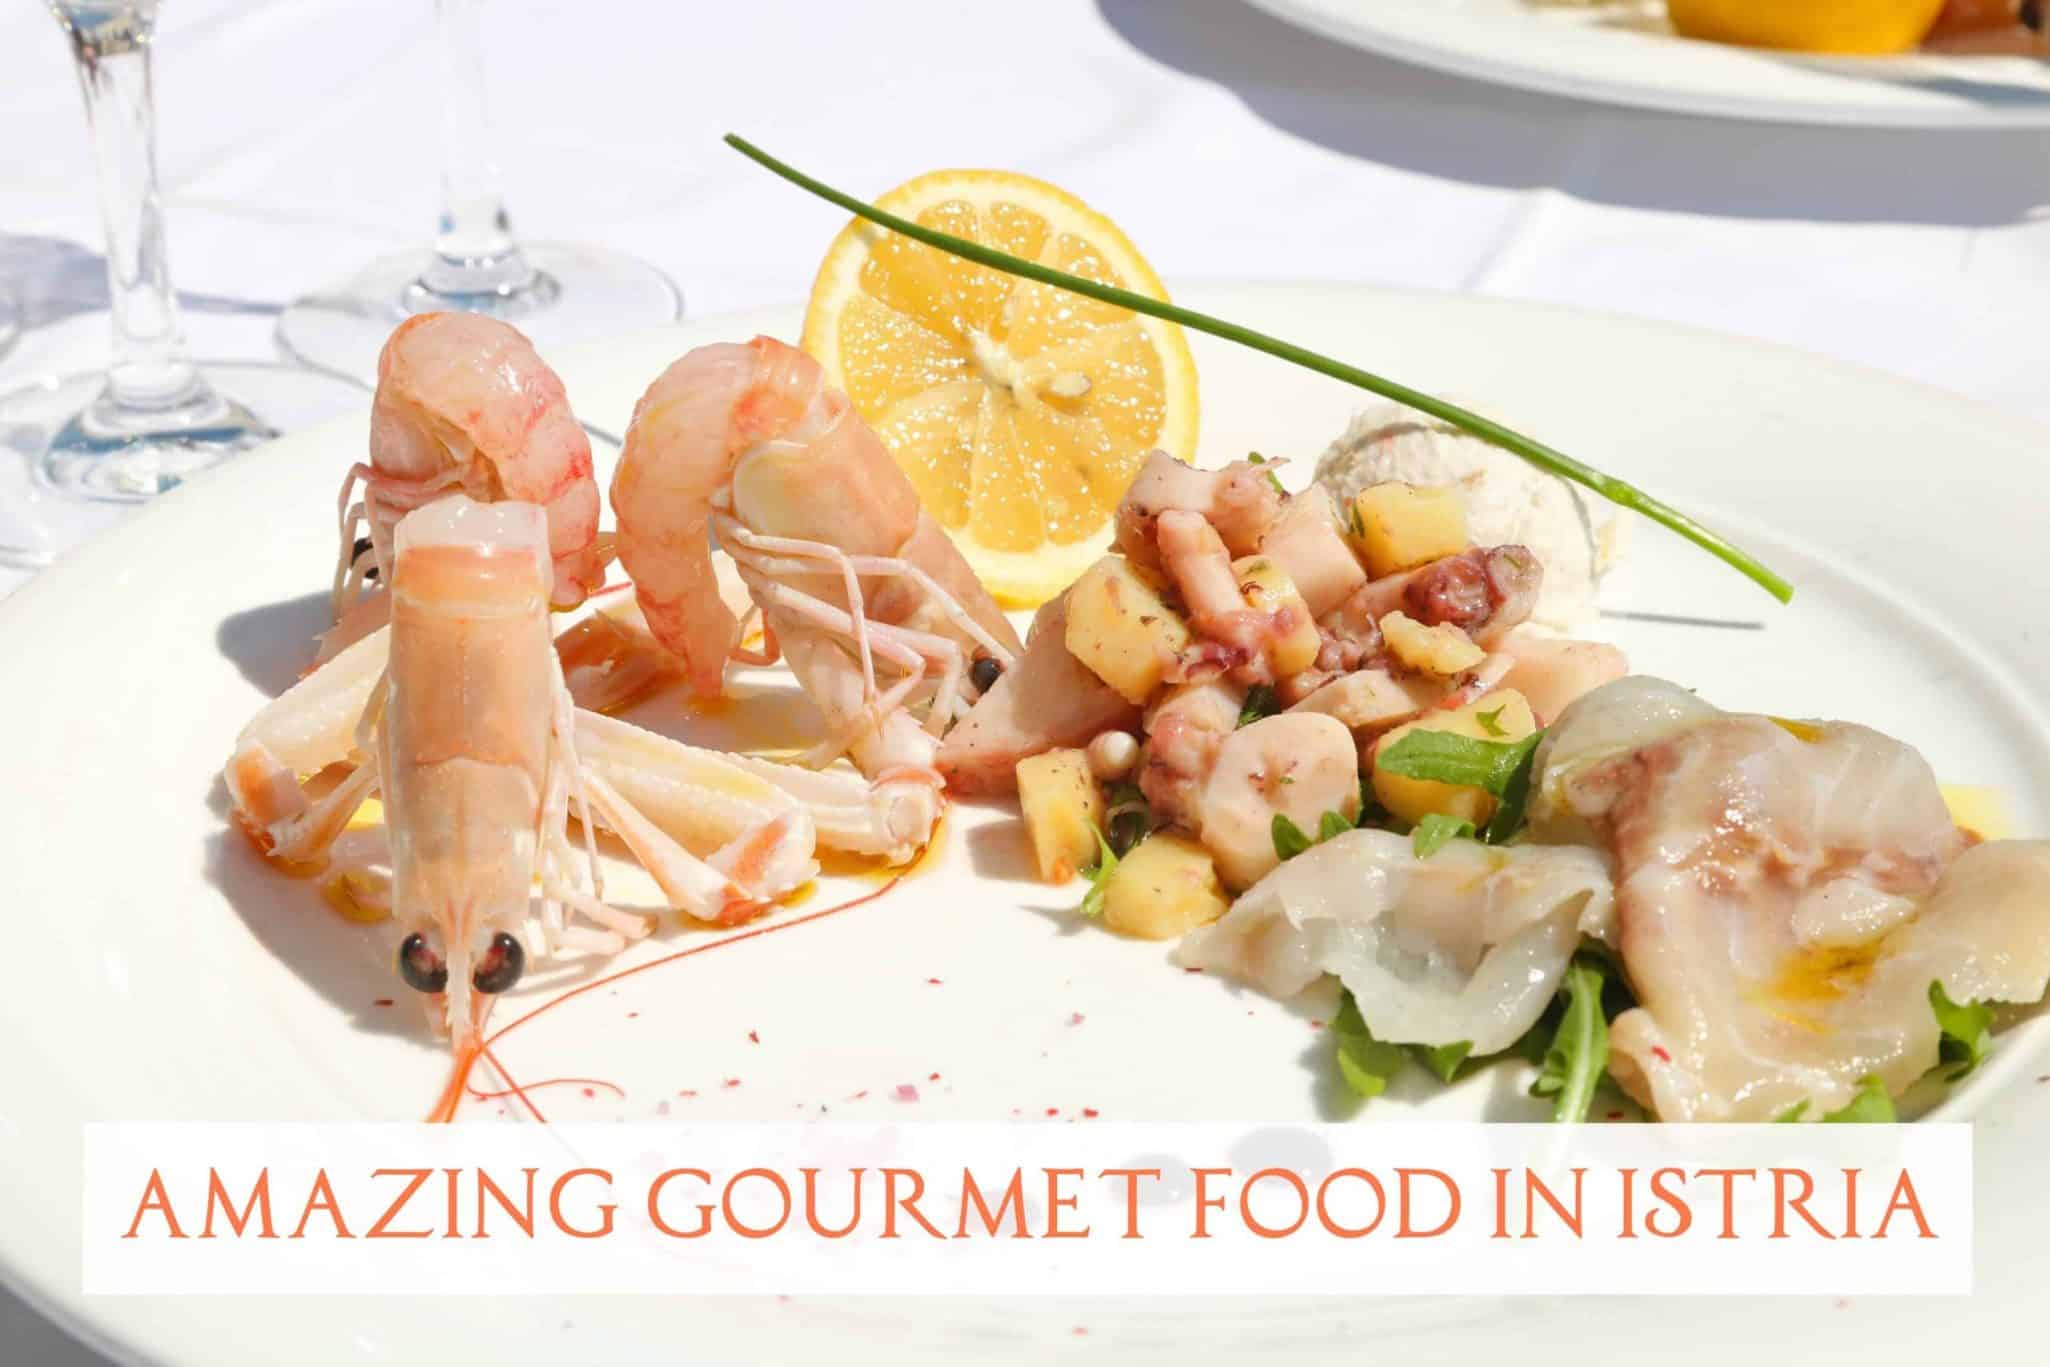 Gourmet Food in Istria you just have to eat (and where to find it)